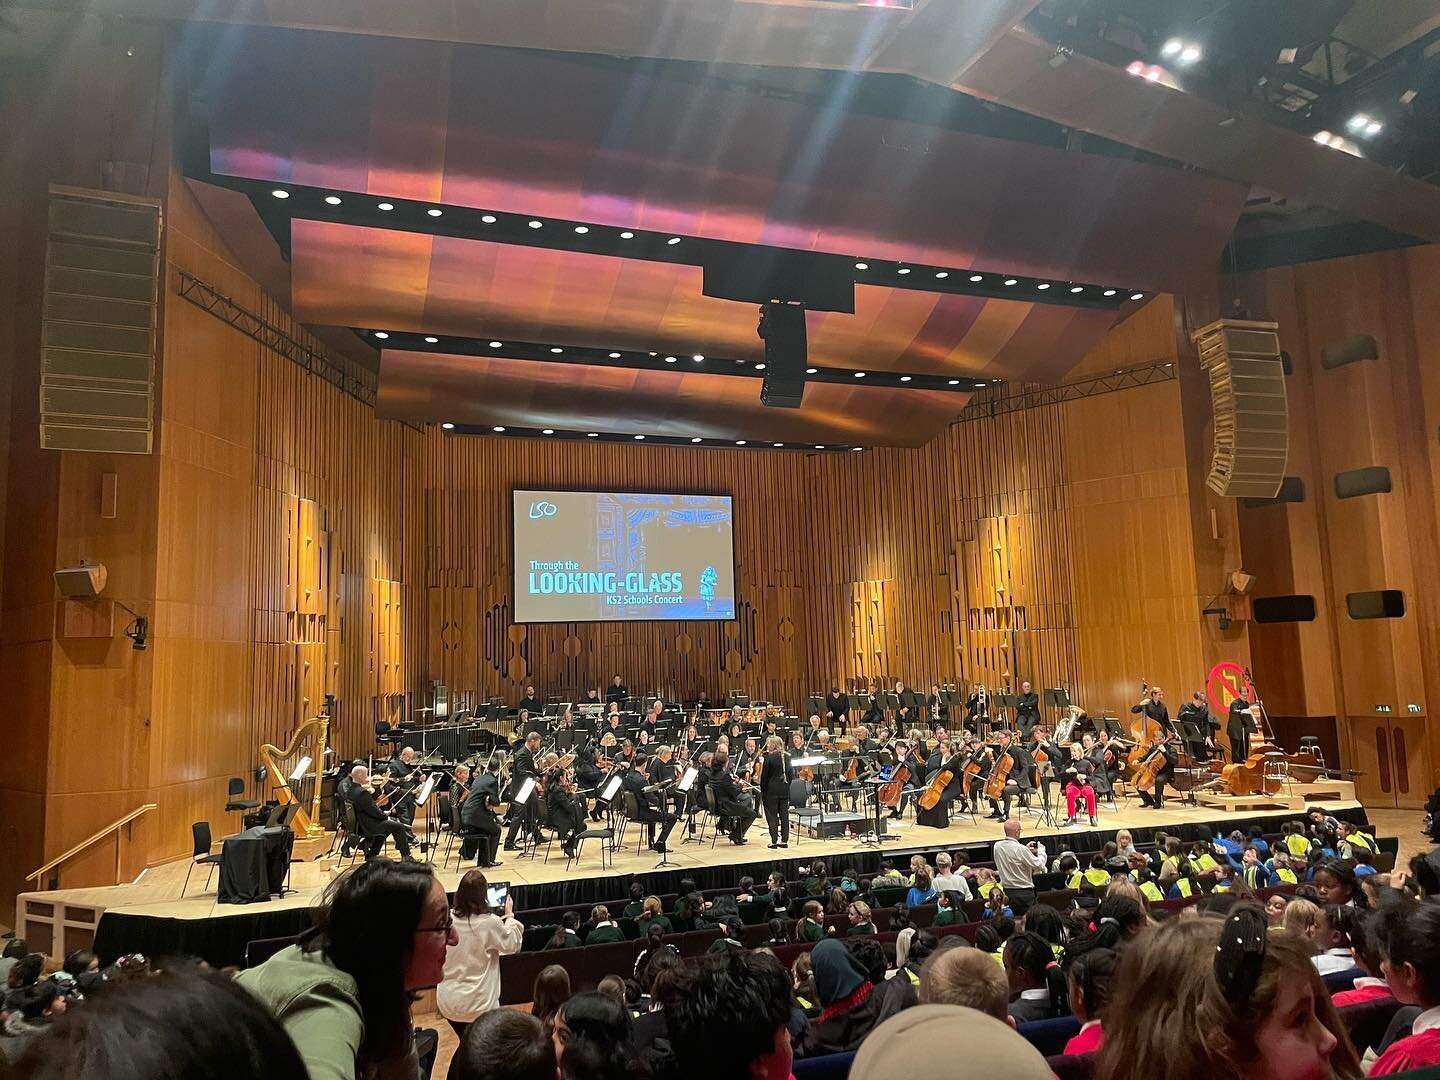 @eleanormorgann @ruth_tola and @mattgoddard79 were invited to see The Alice Sound at the Barbican centre. I fantastic new composition inspired by Alice through the looking glass.

We were graciously invited by @kieravaclavik, for who were building th